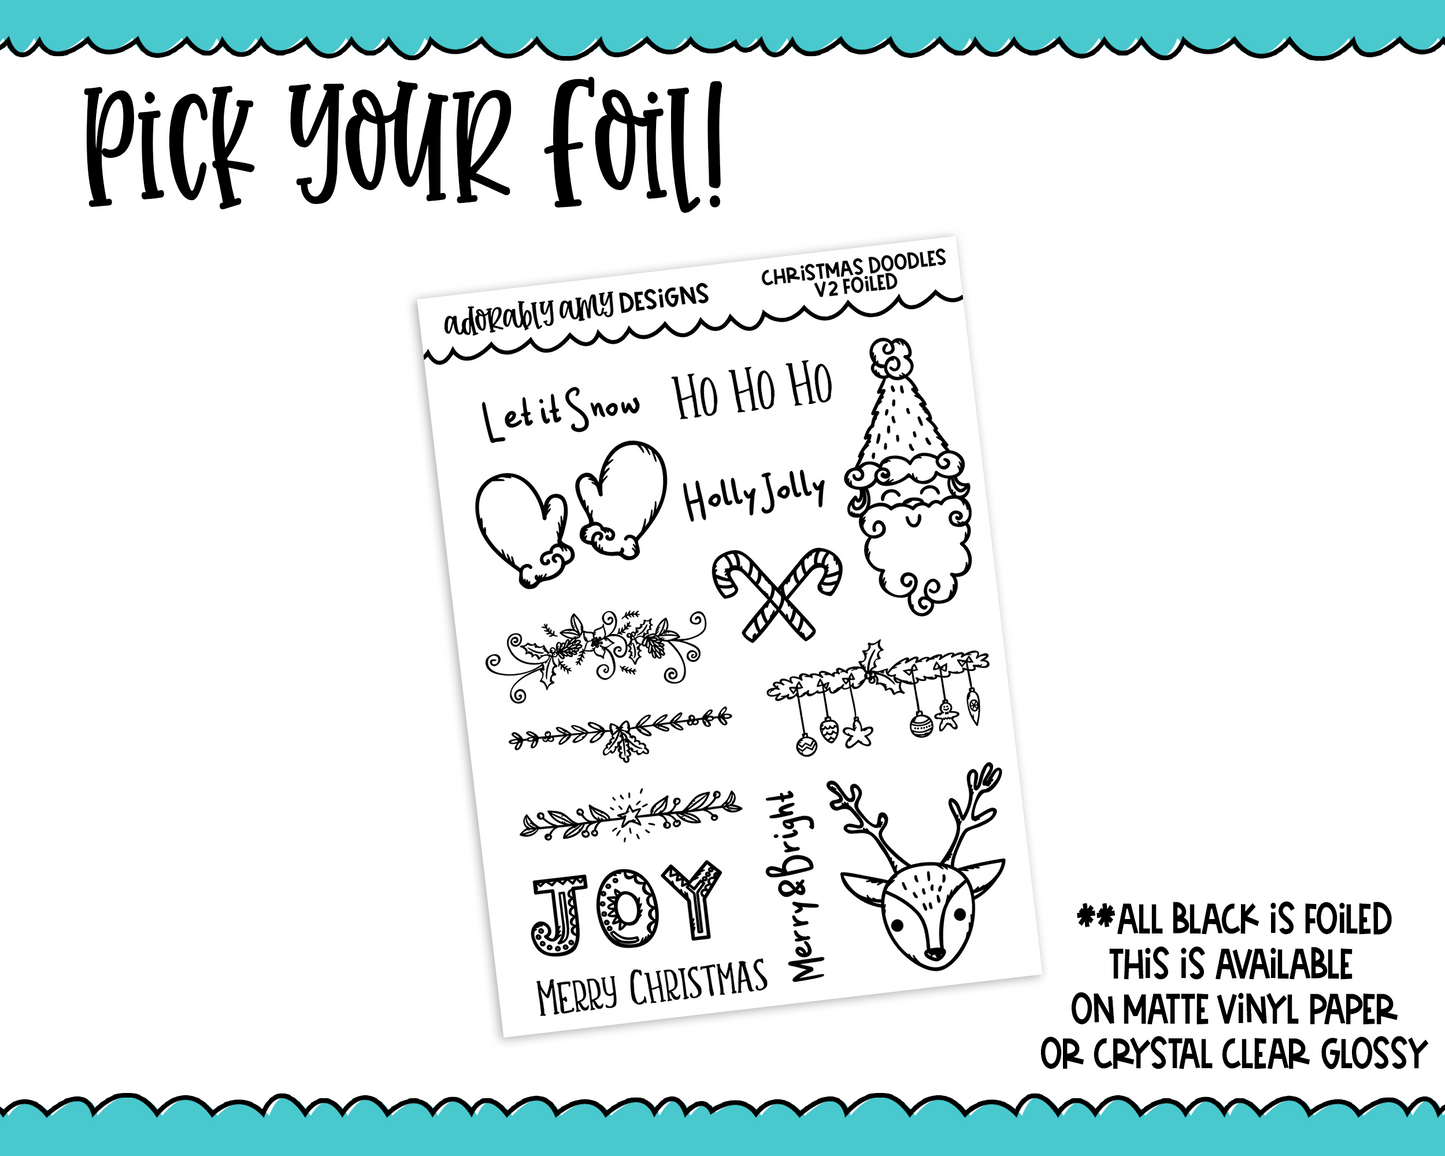 Foiled Christmas Holidays Doodles V2 Planner Stickers for Erin Condren, Plum Planner, or Any Size Planners